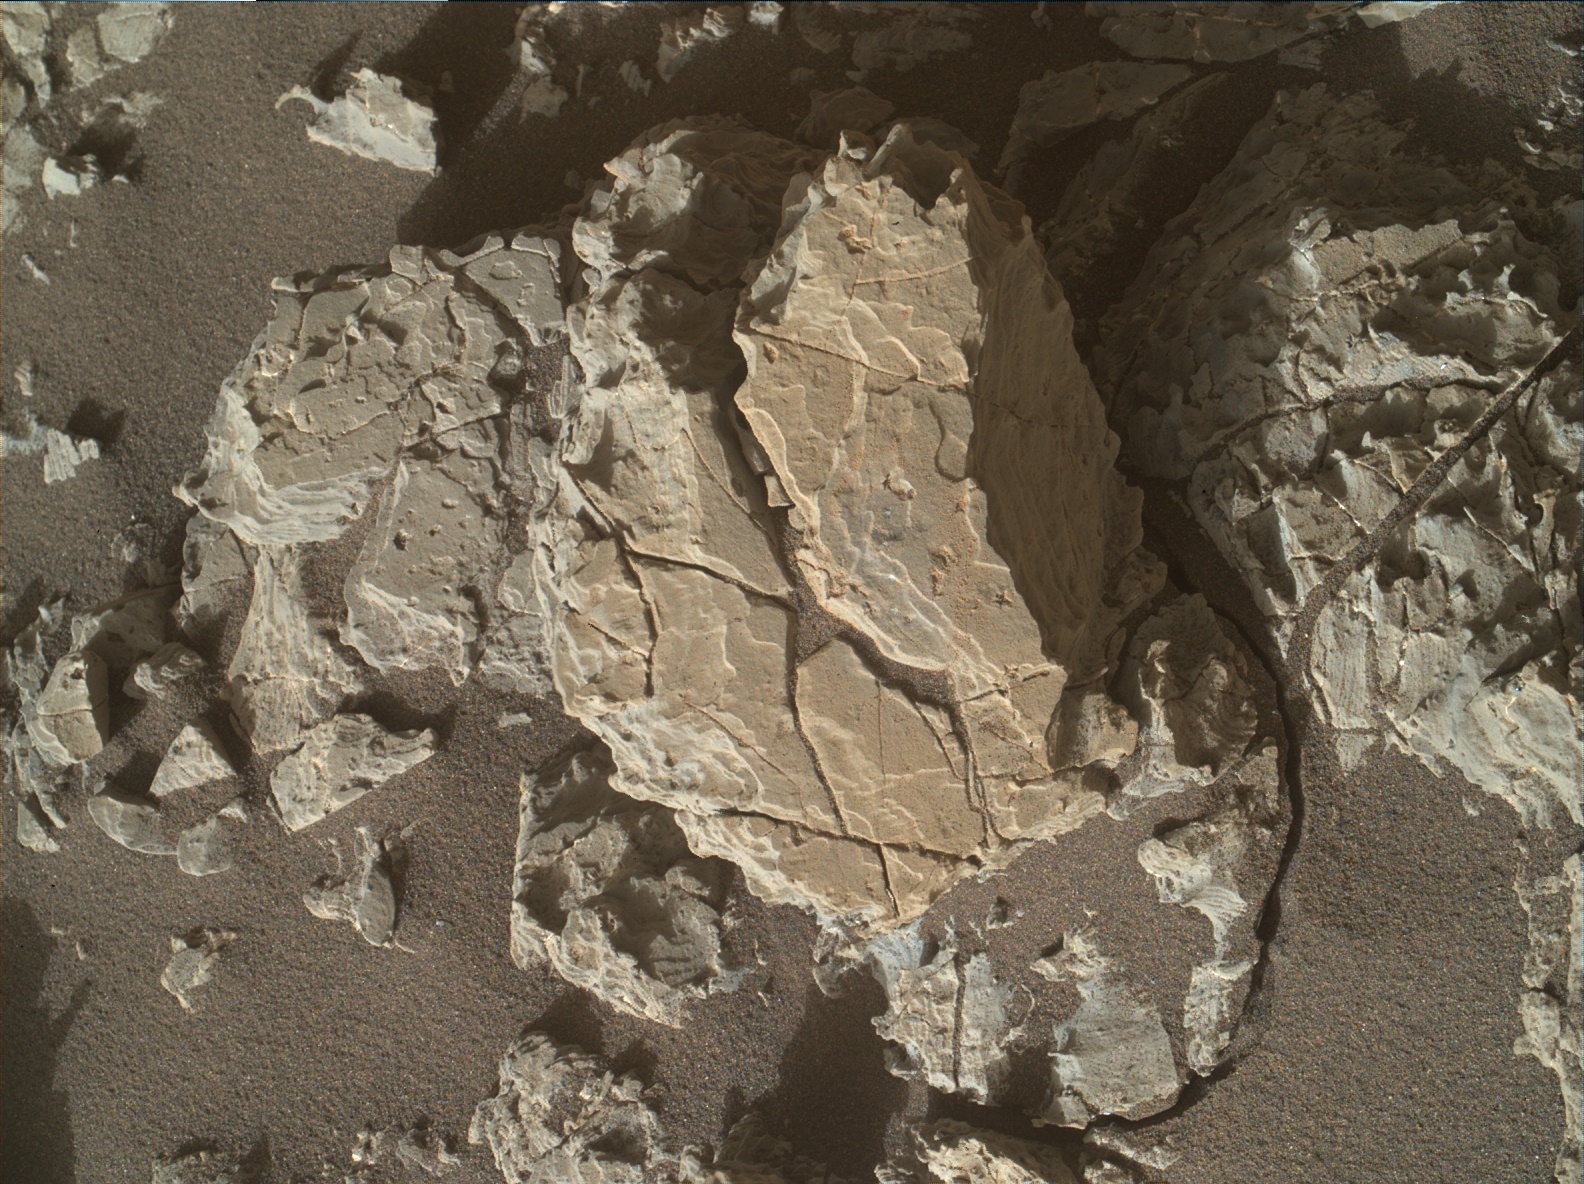 Nasa's Mars rover Curiosity acquired this image using its Mars Hand Lens Imager (MAHLI) on Sol 1933